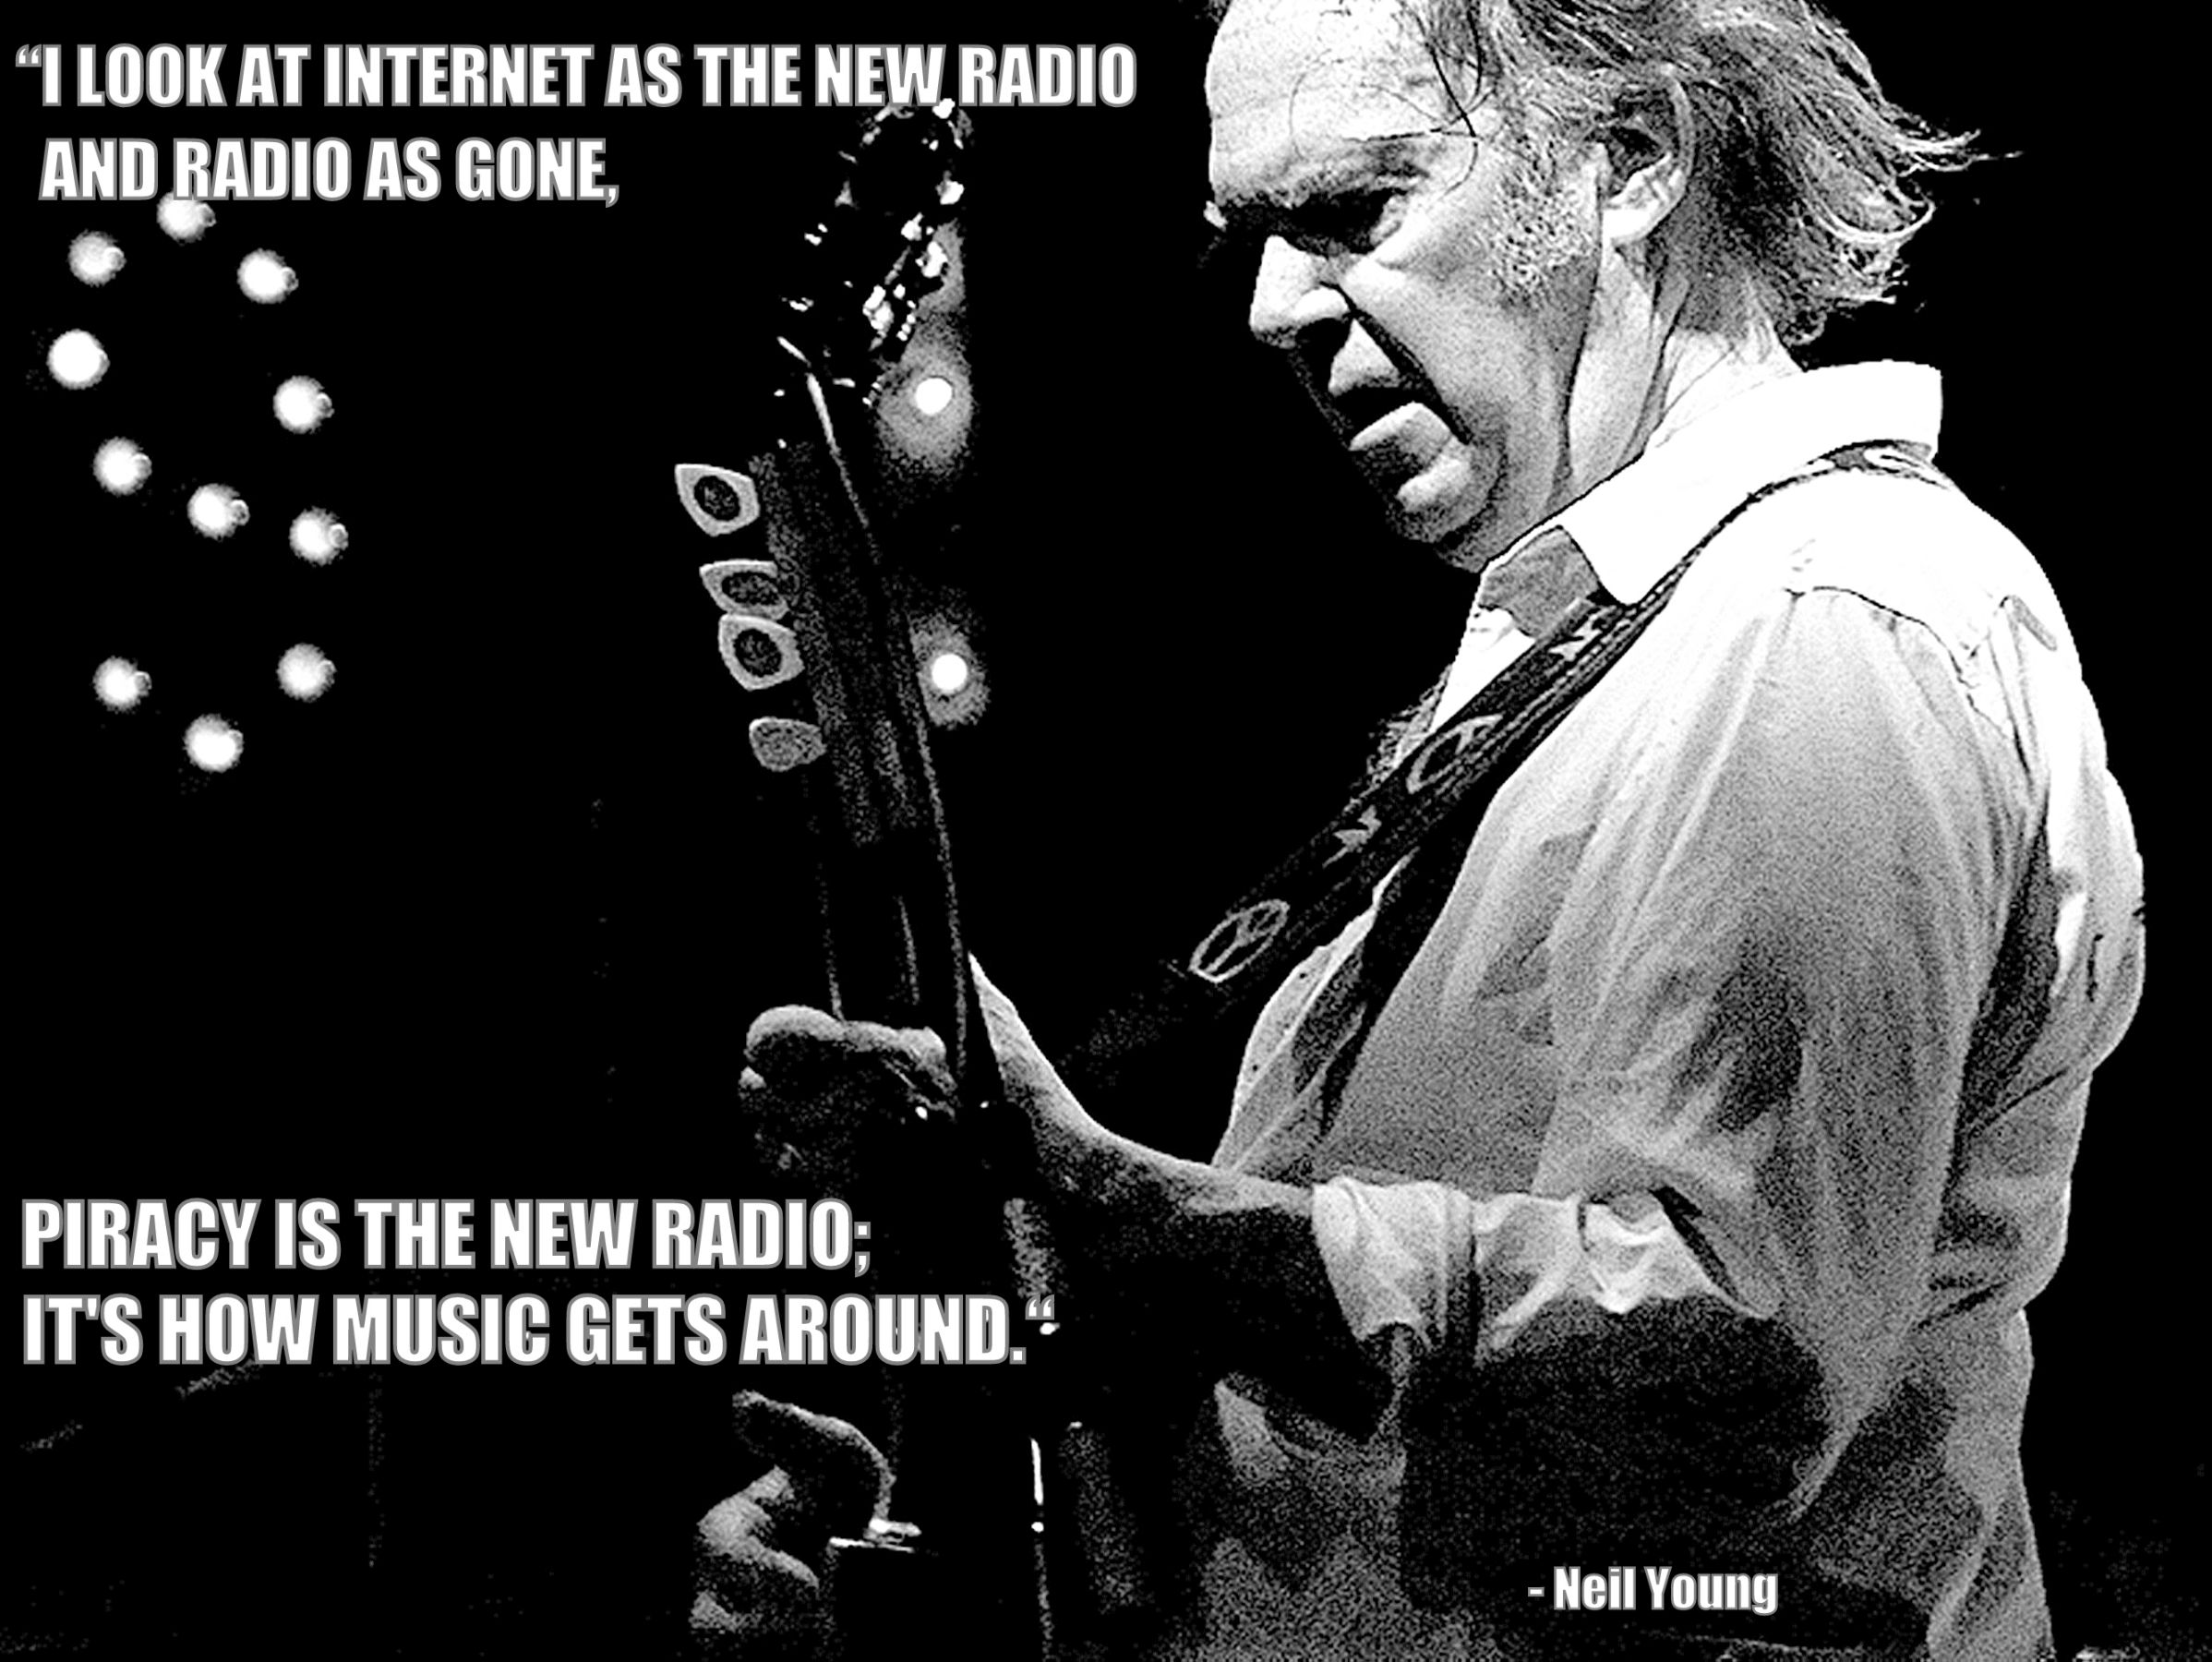 Famous quotes about 'Neil Young' - Sualci Quotes 2019